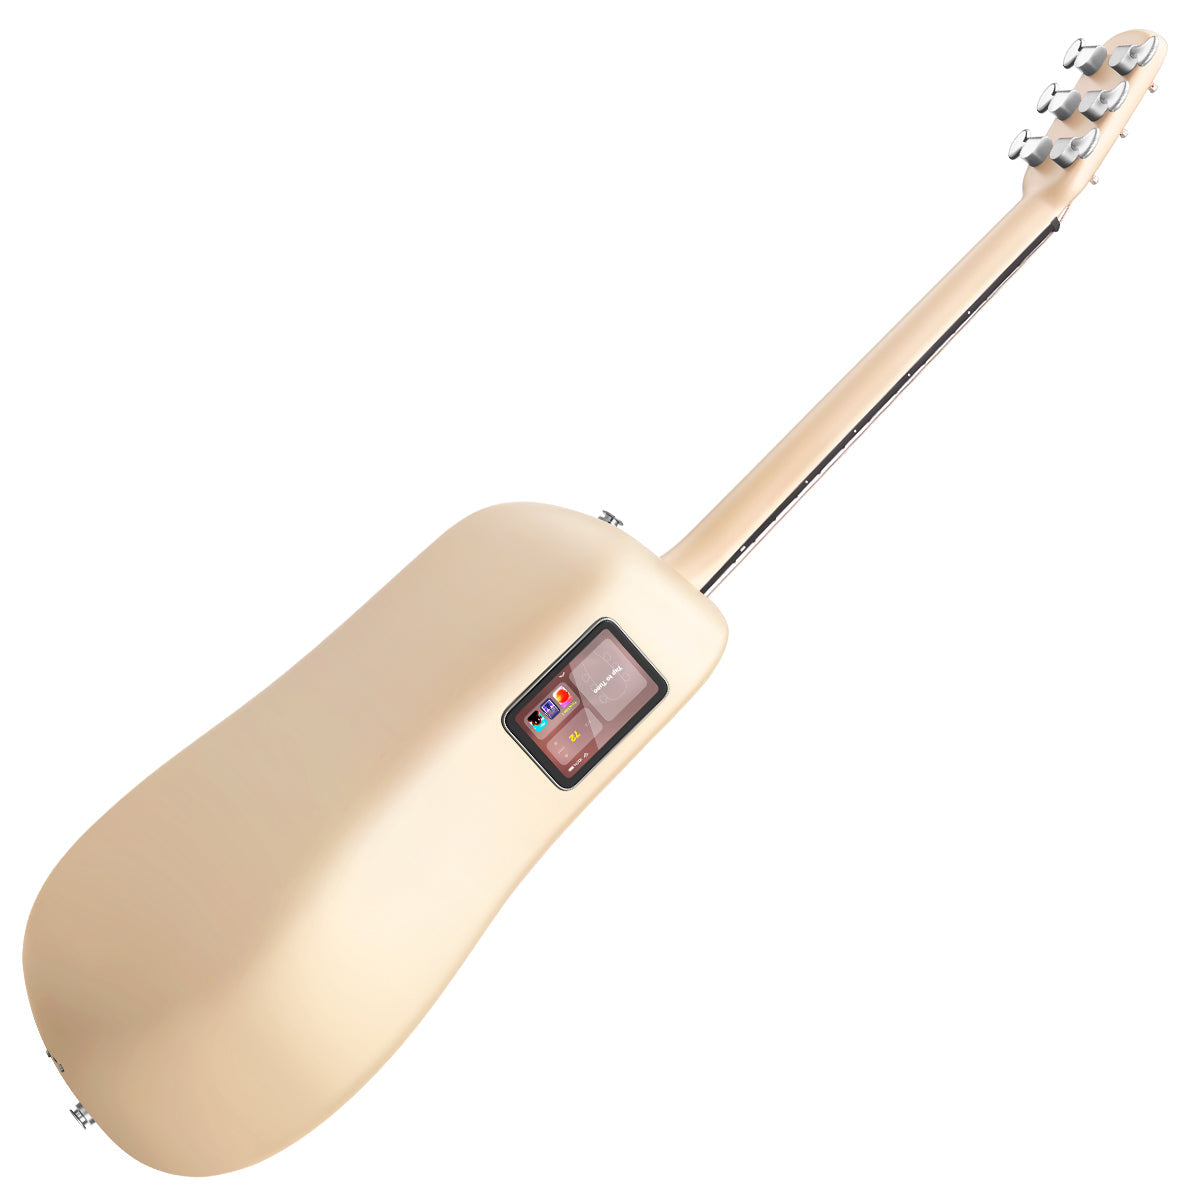 LAVA ME4 Carbon 38" with Space Bag ~ Soft Gold, Acoustic Guitar for sale at Richards Guitars.